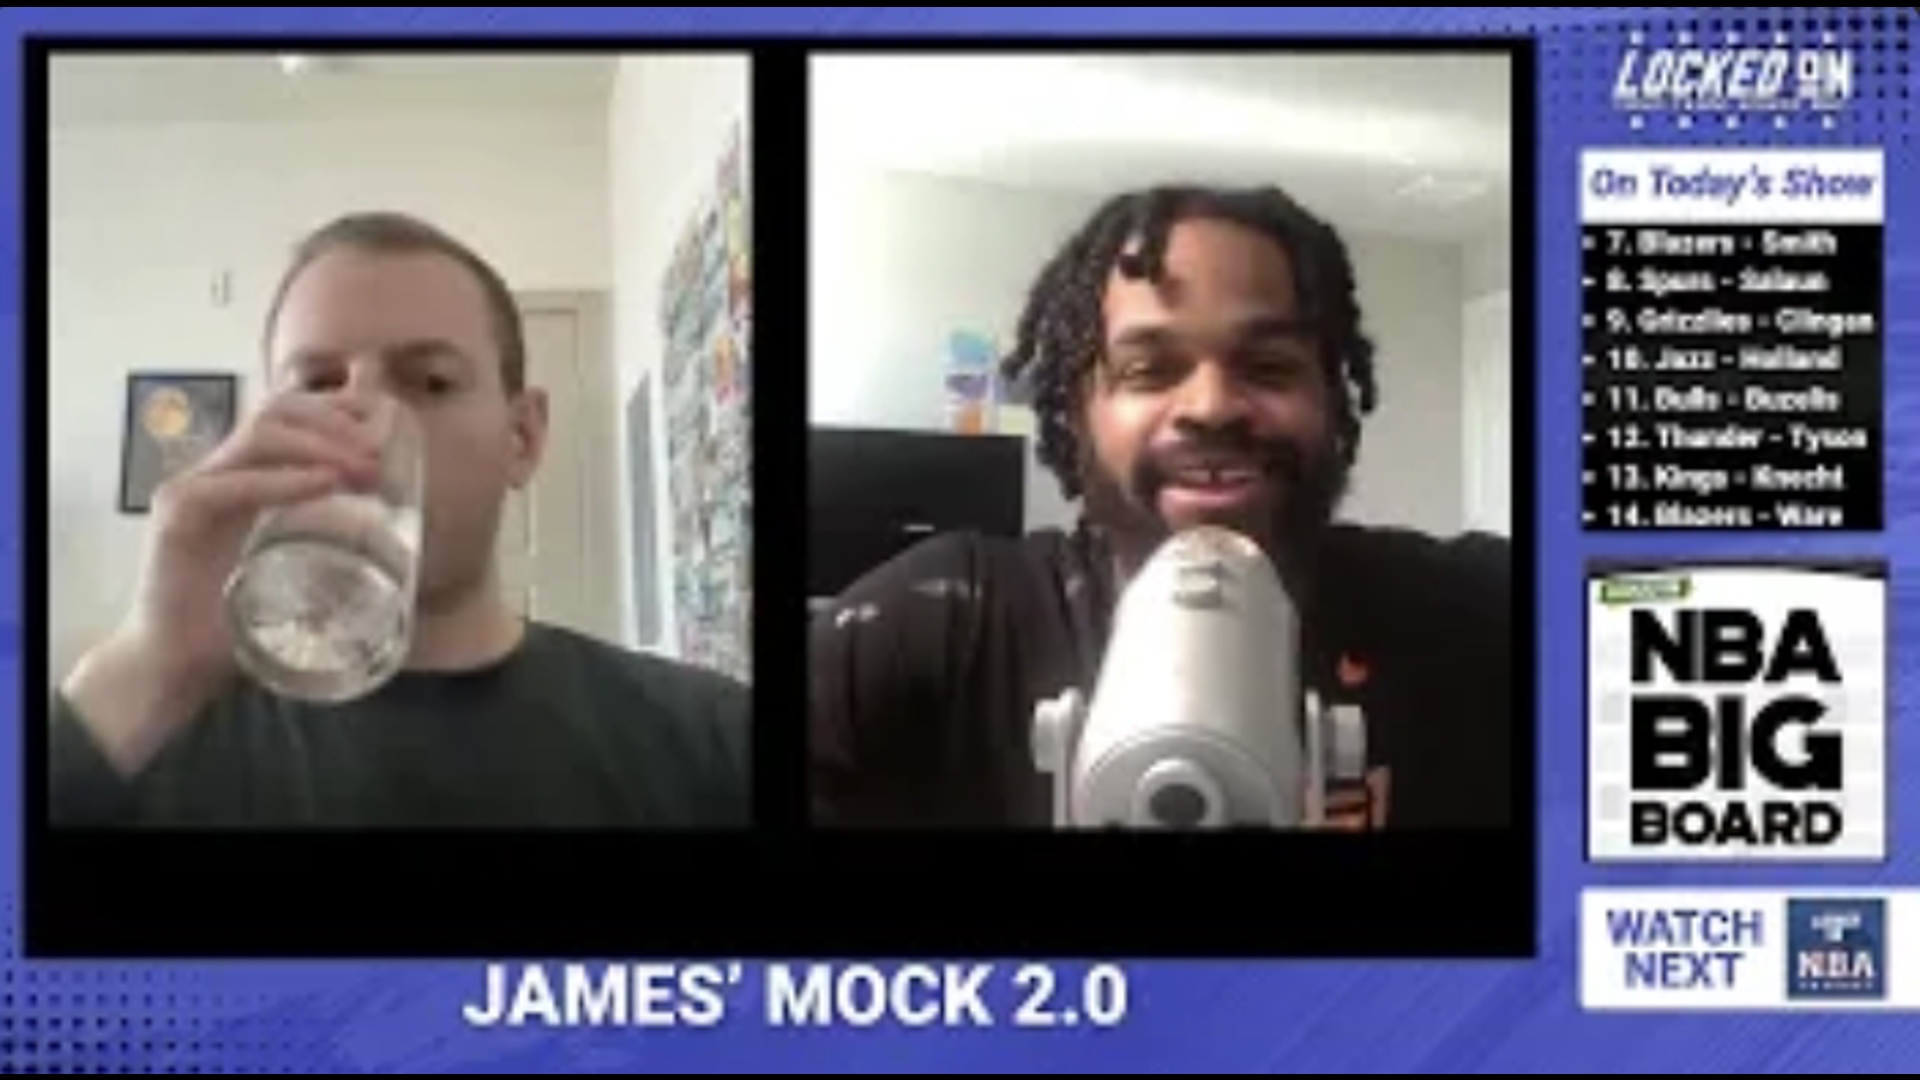 James and Rich go over James' mock draft for picks 8-14 and have a good debate about Kel'el Ware. See part 1 on Thursday's show